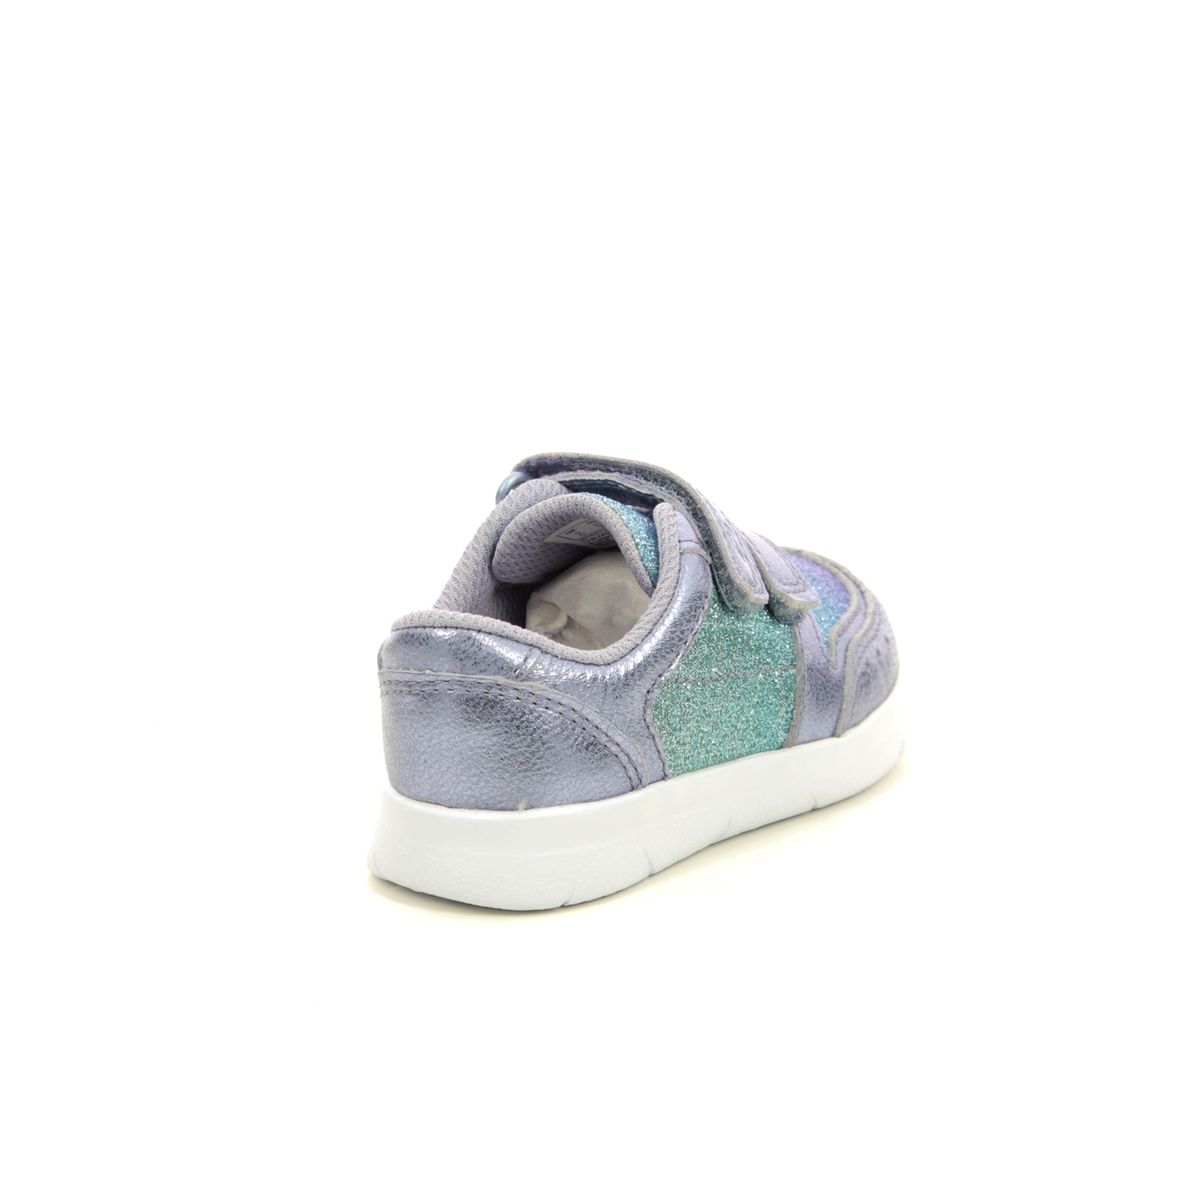 Clarks Ath Sonar T Lilac Kids toddler girls trainers 5412-17G